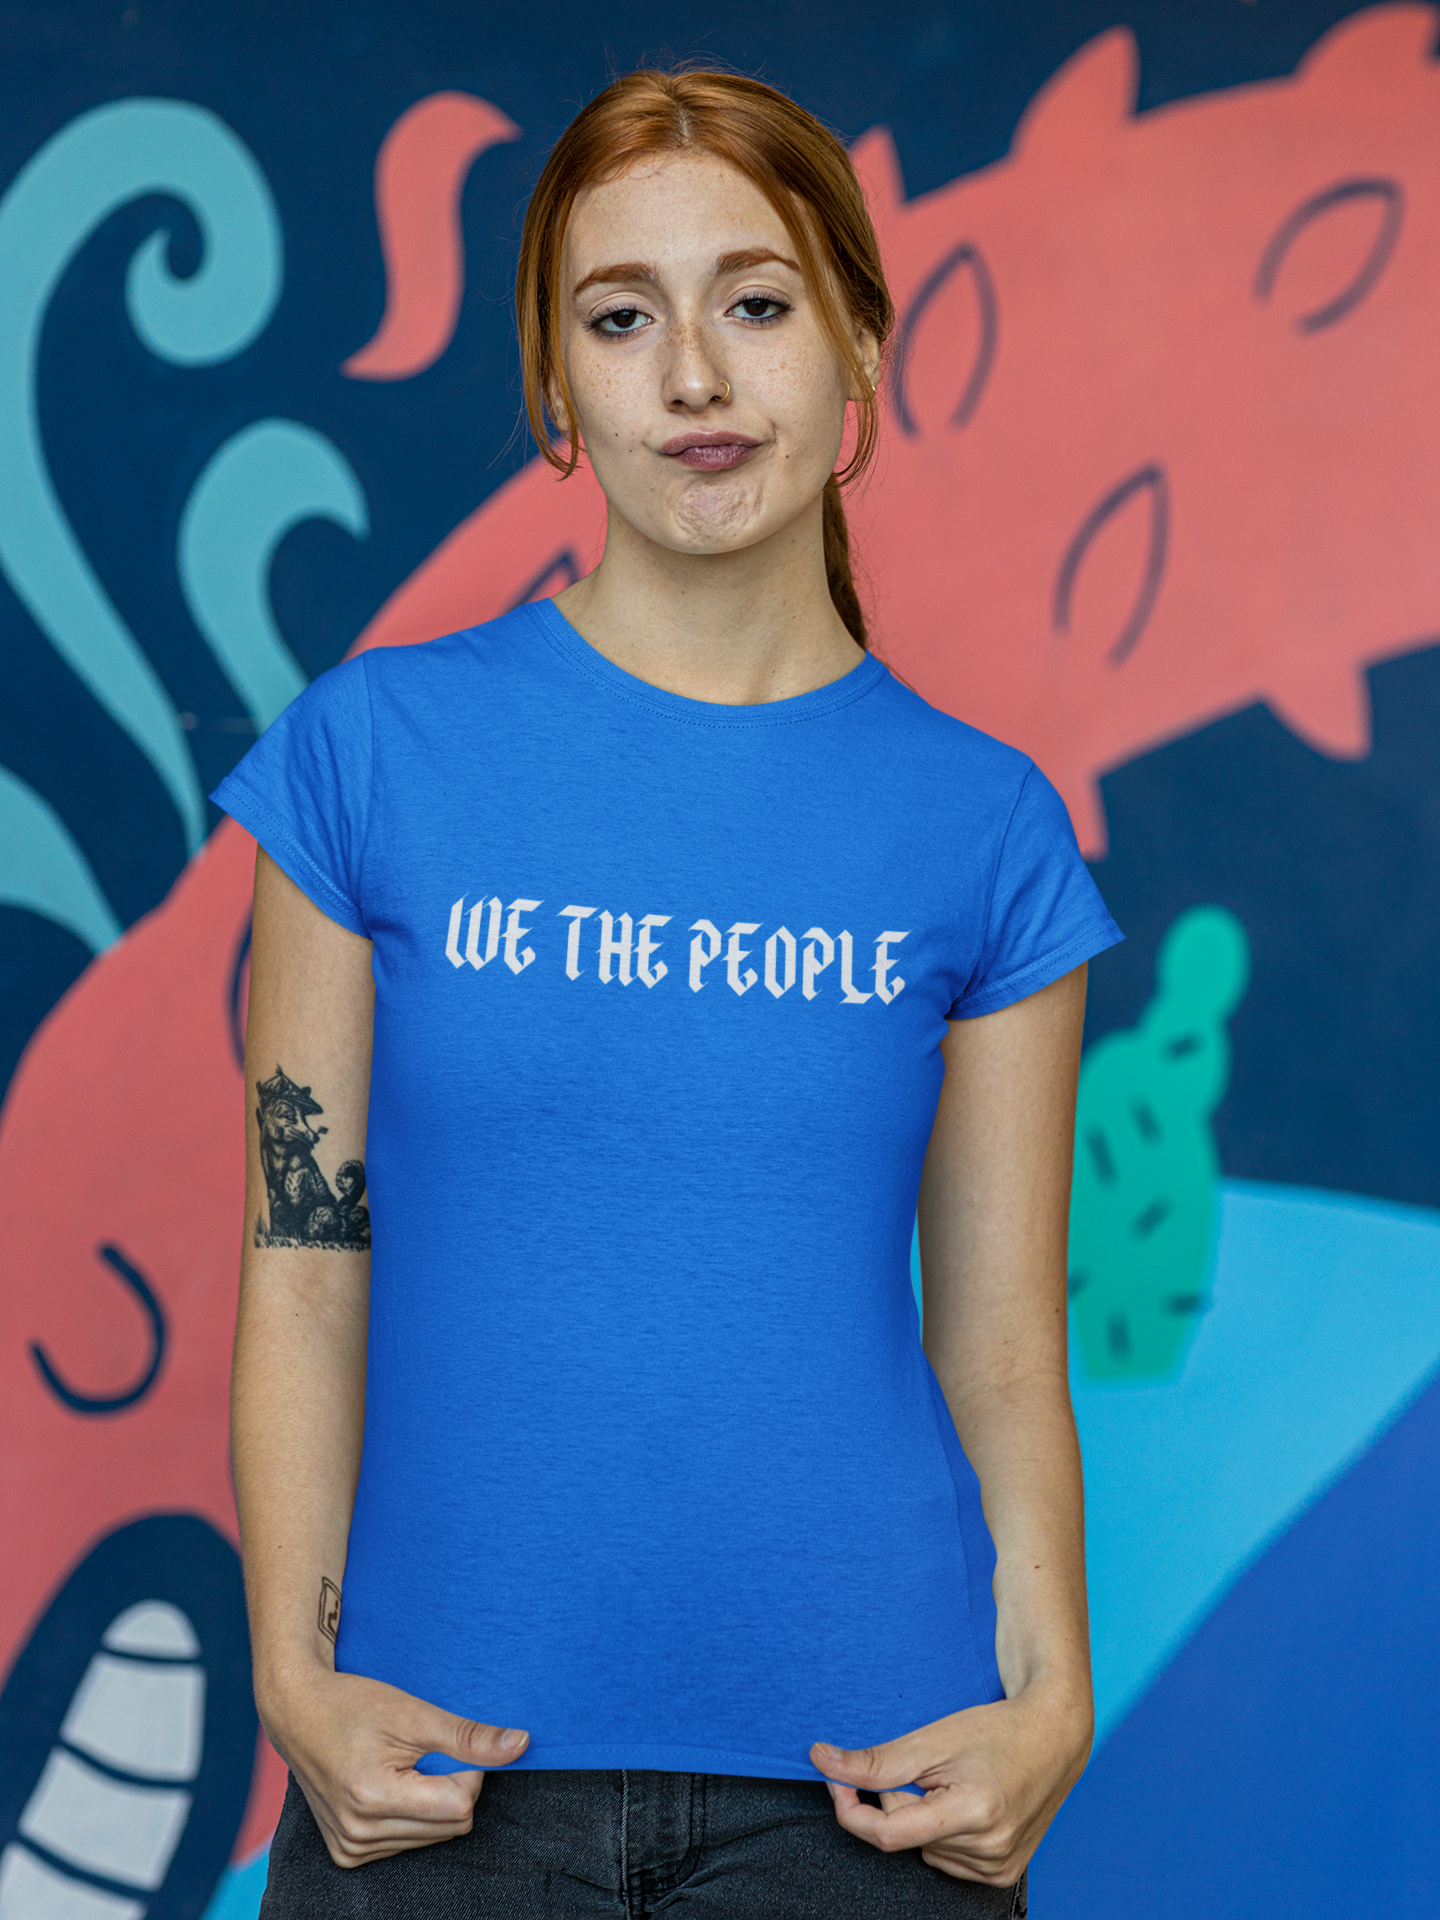 We The People T-Shirt Women, High Quality print, World Wide Shipping